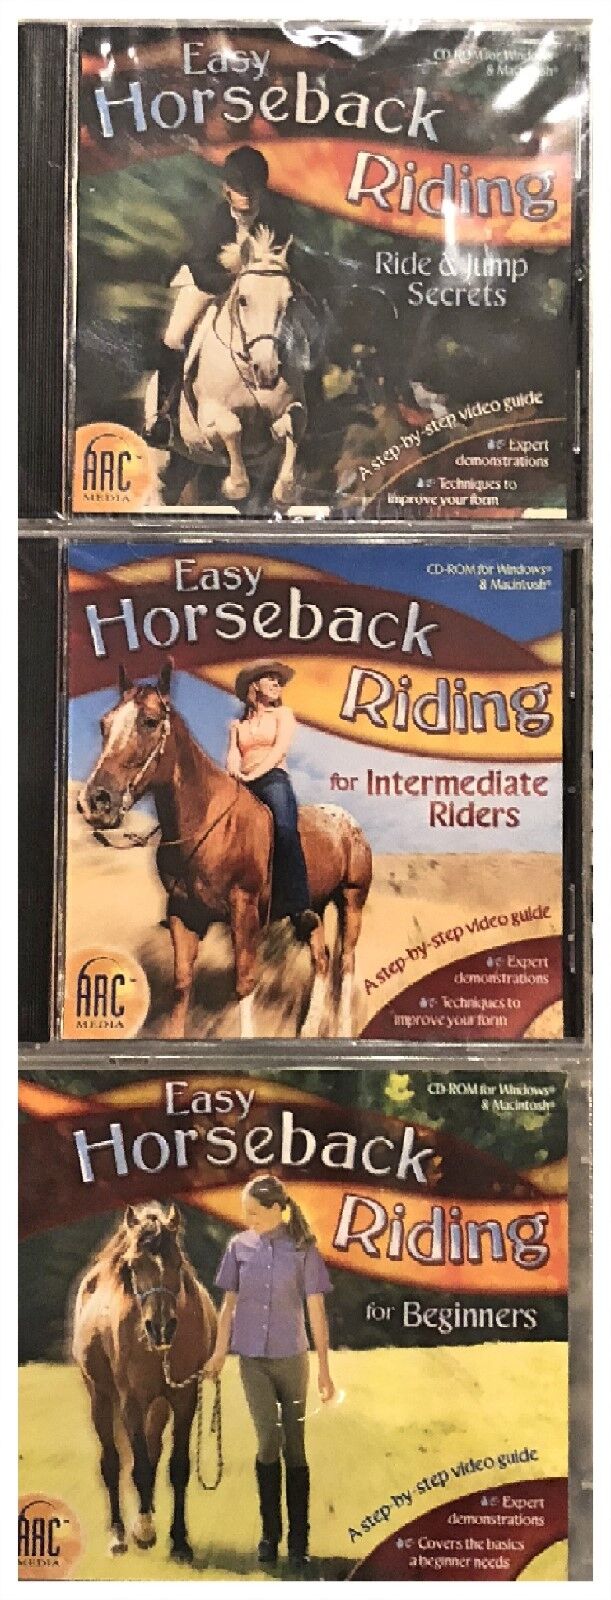 Easy Horseback Riding and Jumping Pc New 3 Titles Win10 8 7 XP